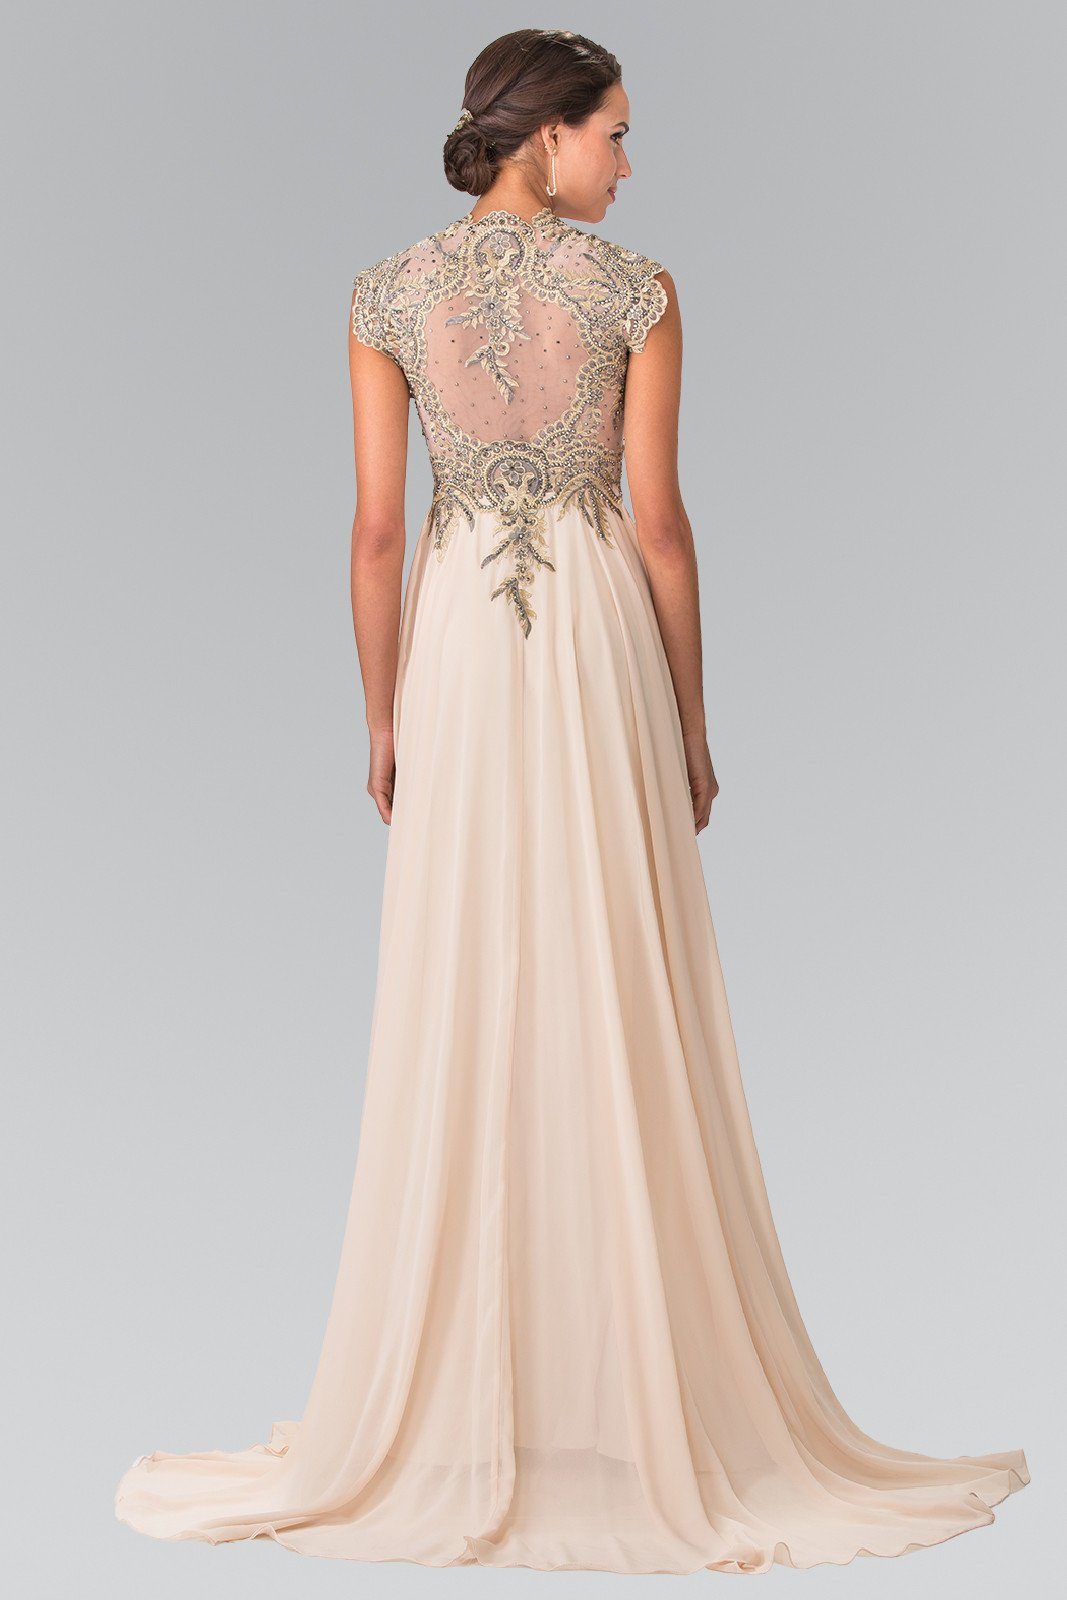 Long Sleeveless Dress with Gold Applique by Elizabeth K GL2229-Long Formal Dresses-ABC Fashion